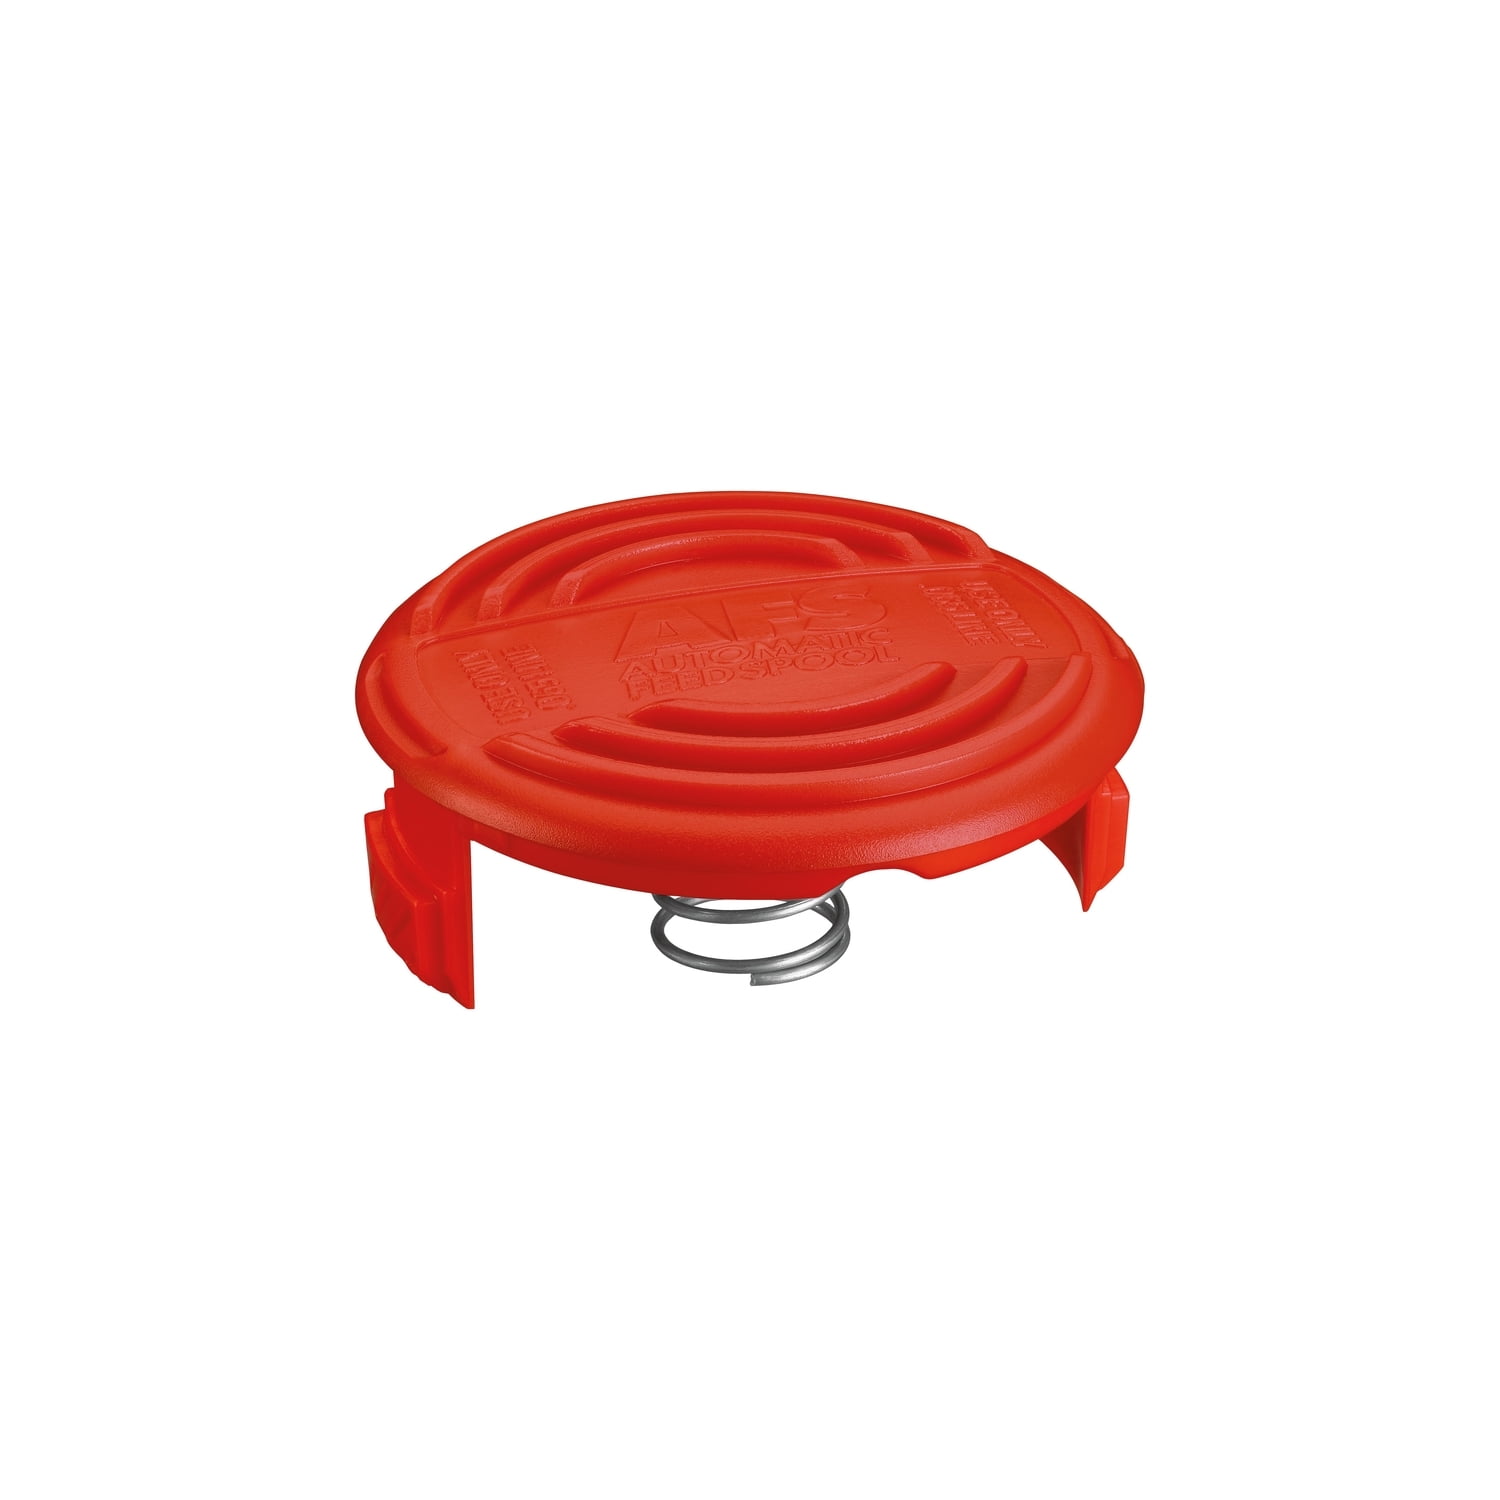 Black+Decker RC-100-P Spool Cap and Spring for AFS Trimmer